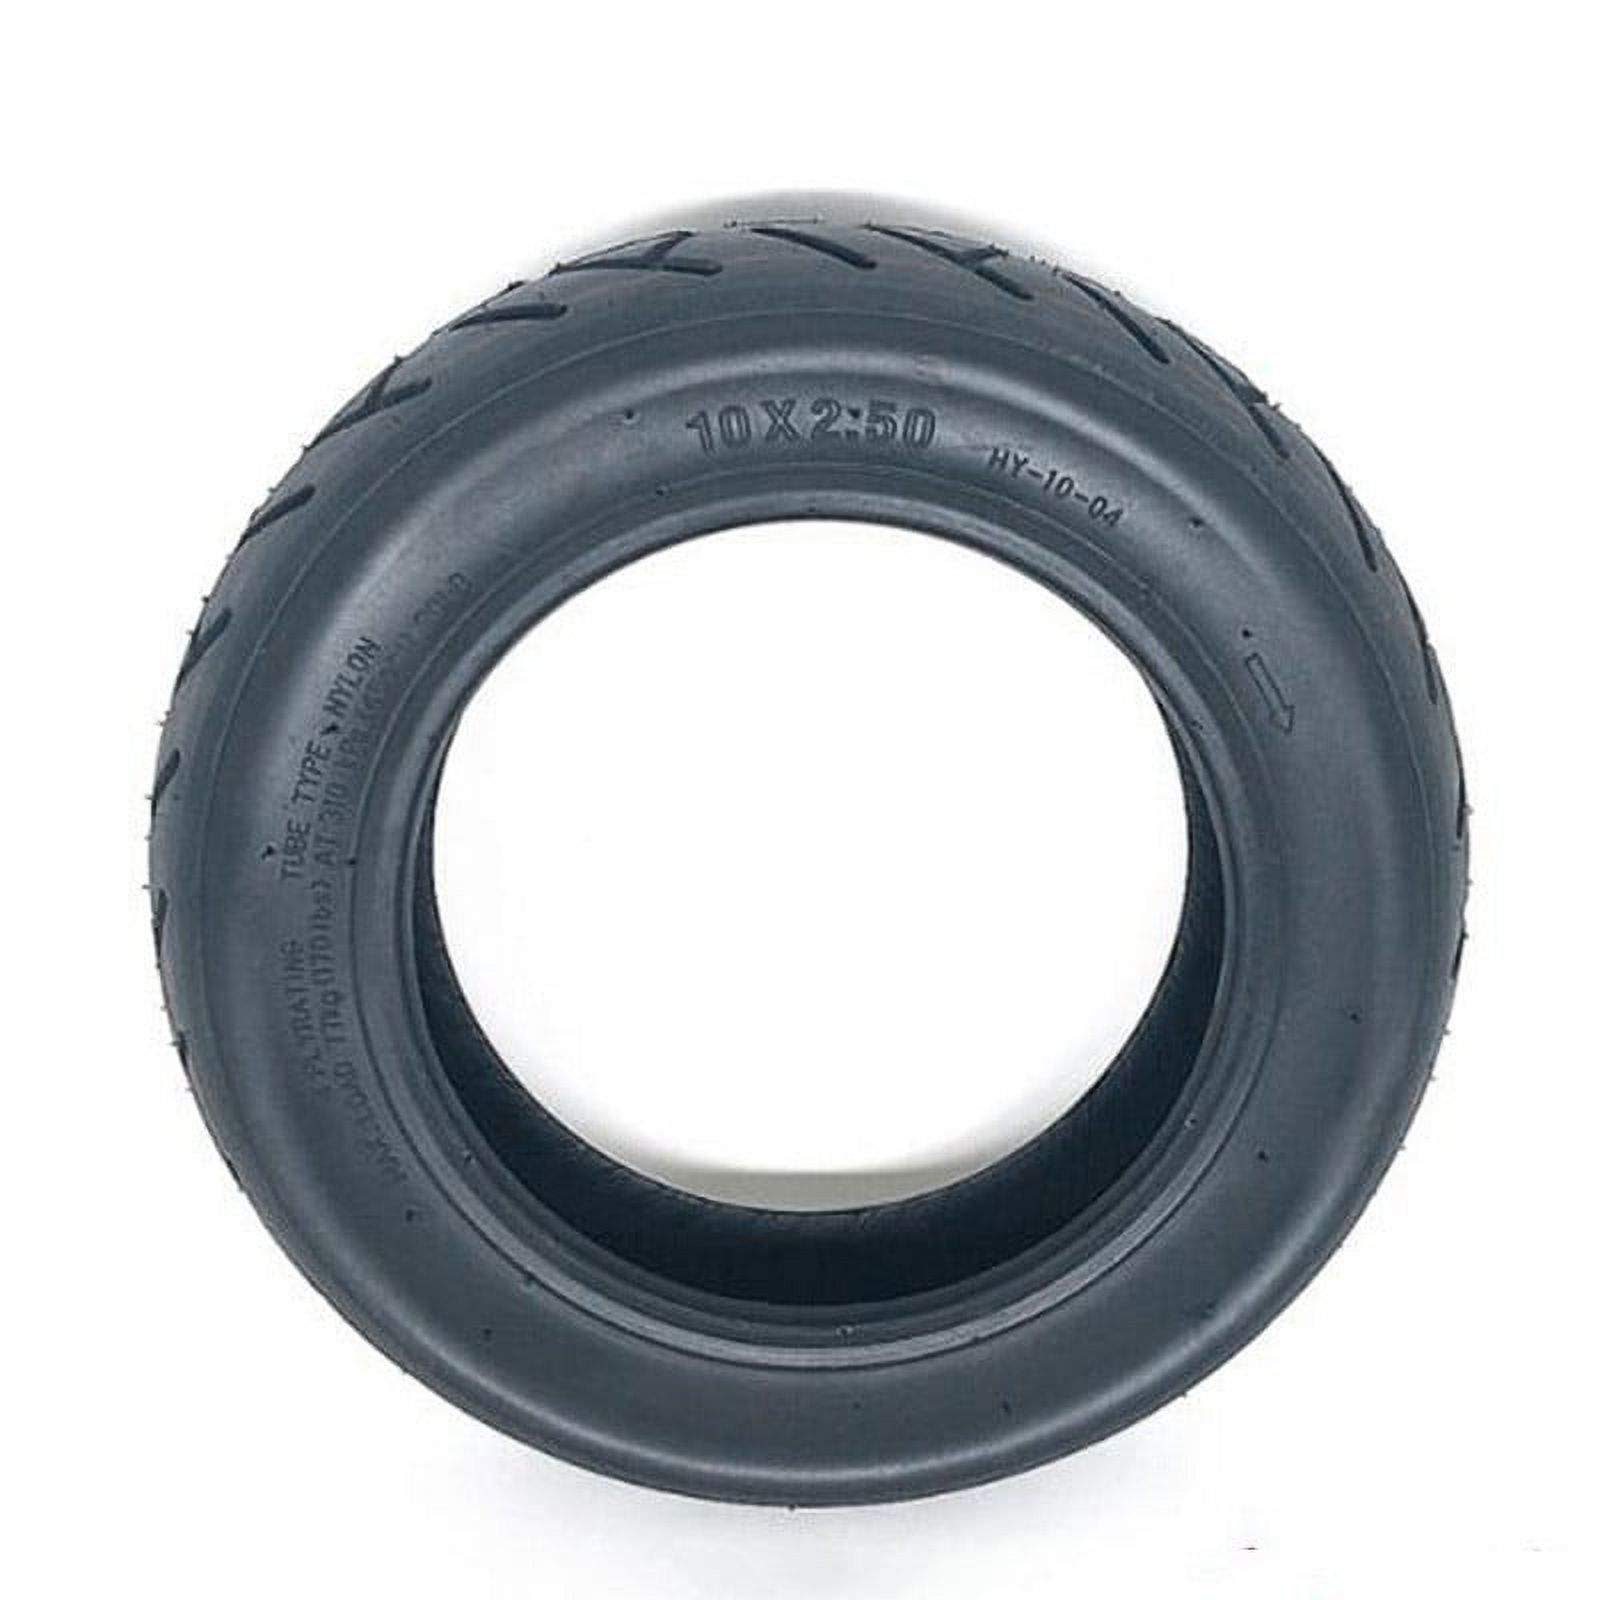 Electric Scooter Tire Rubber 10X2.50 Inner Tube Spare Replacement Parts - image 5 of 7